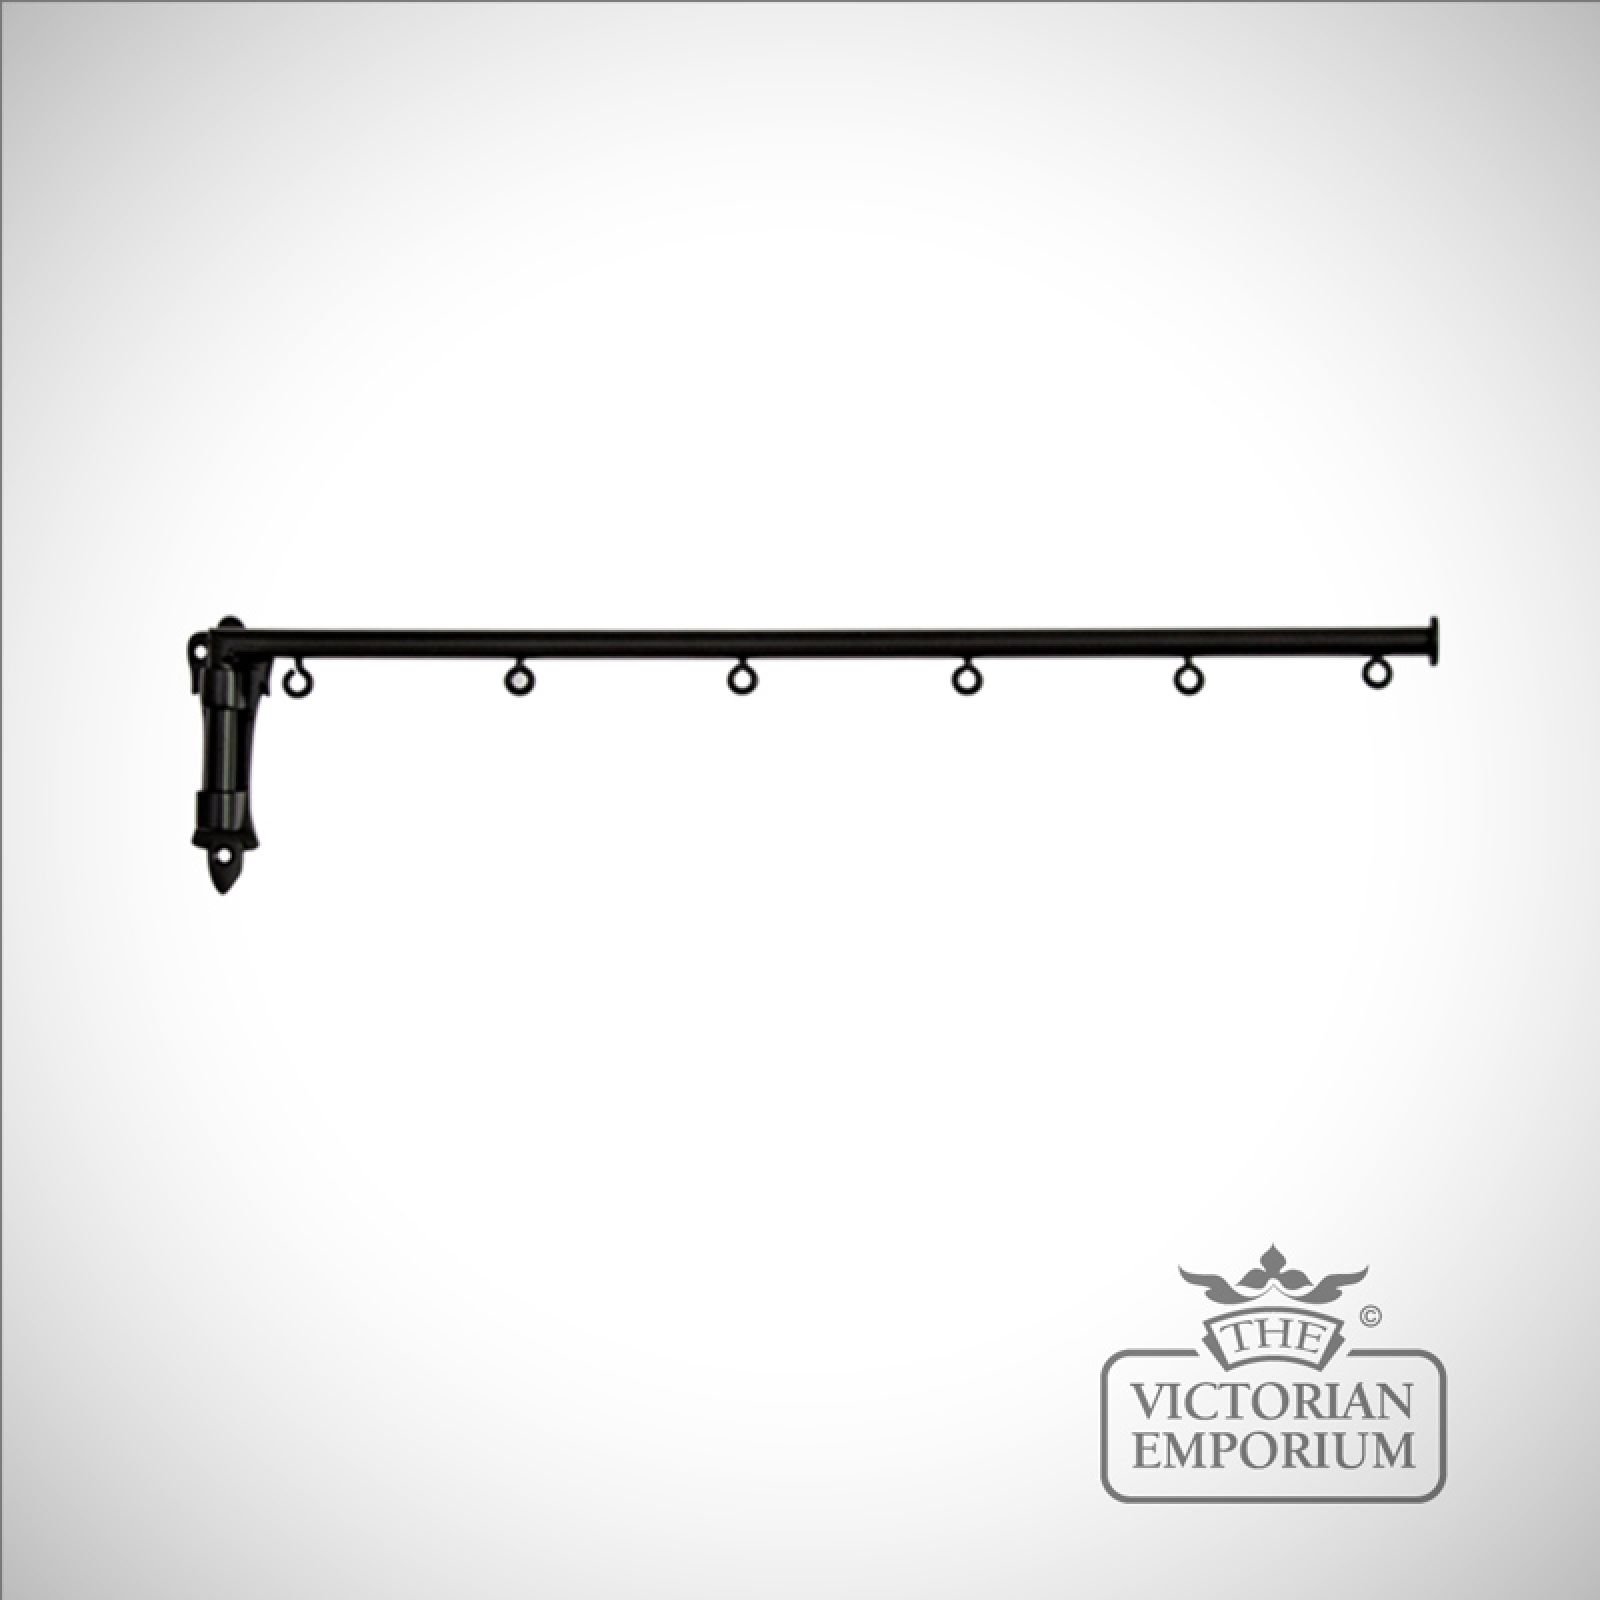 Dormer Window wrought iron curtain swing arm with or without eyes